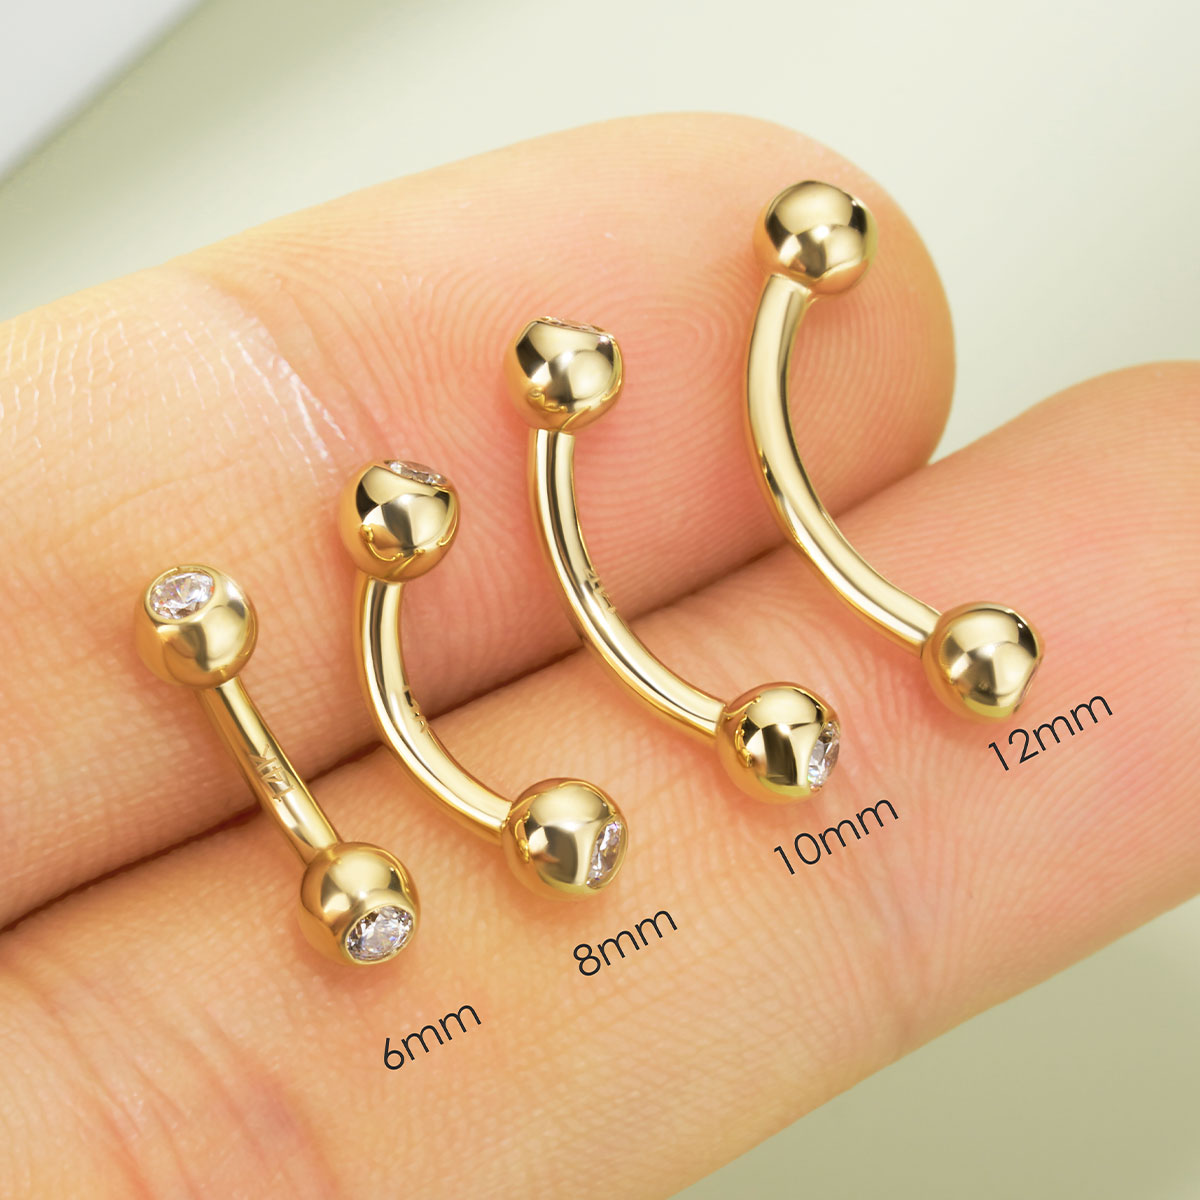 6mm solid gold belly ring